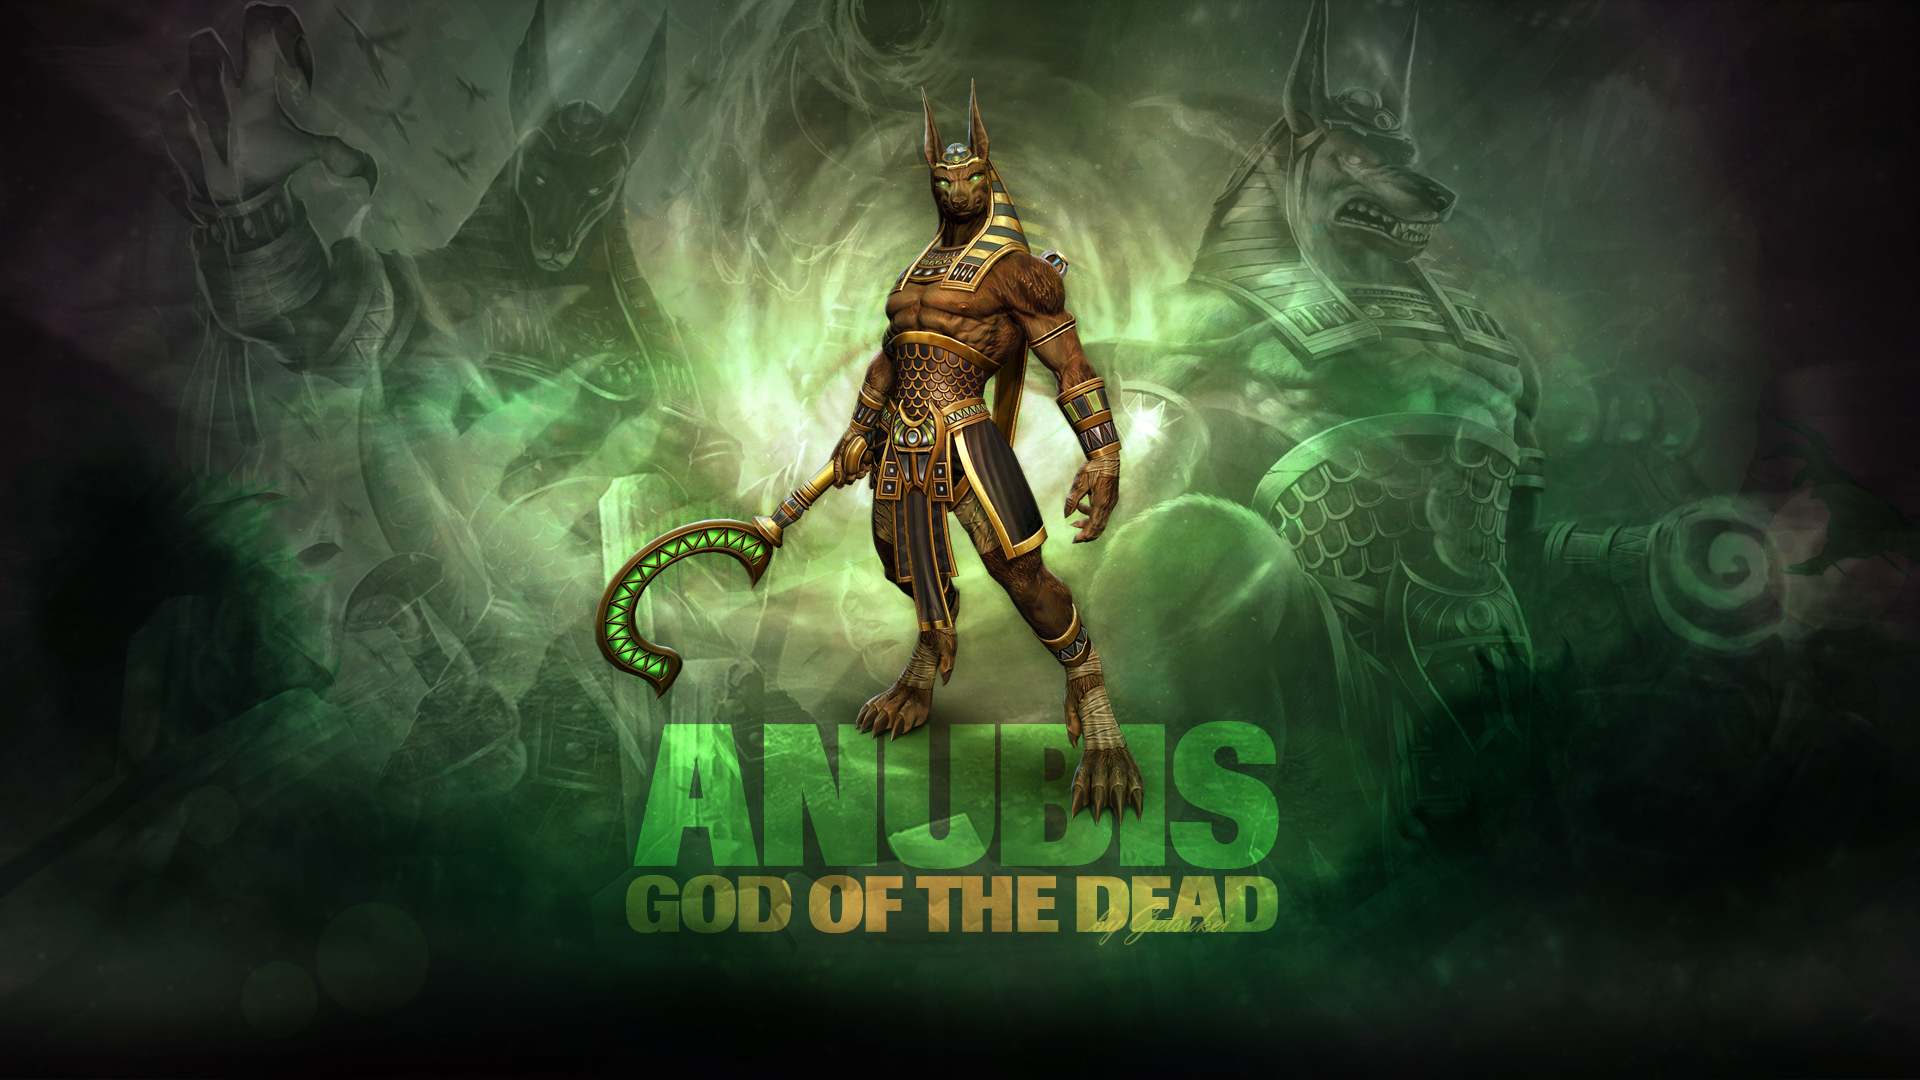 SMITE - Anubis, God of the Dead (Wallpaper) by Getsukeii 